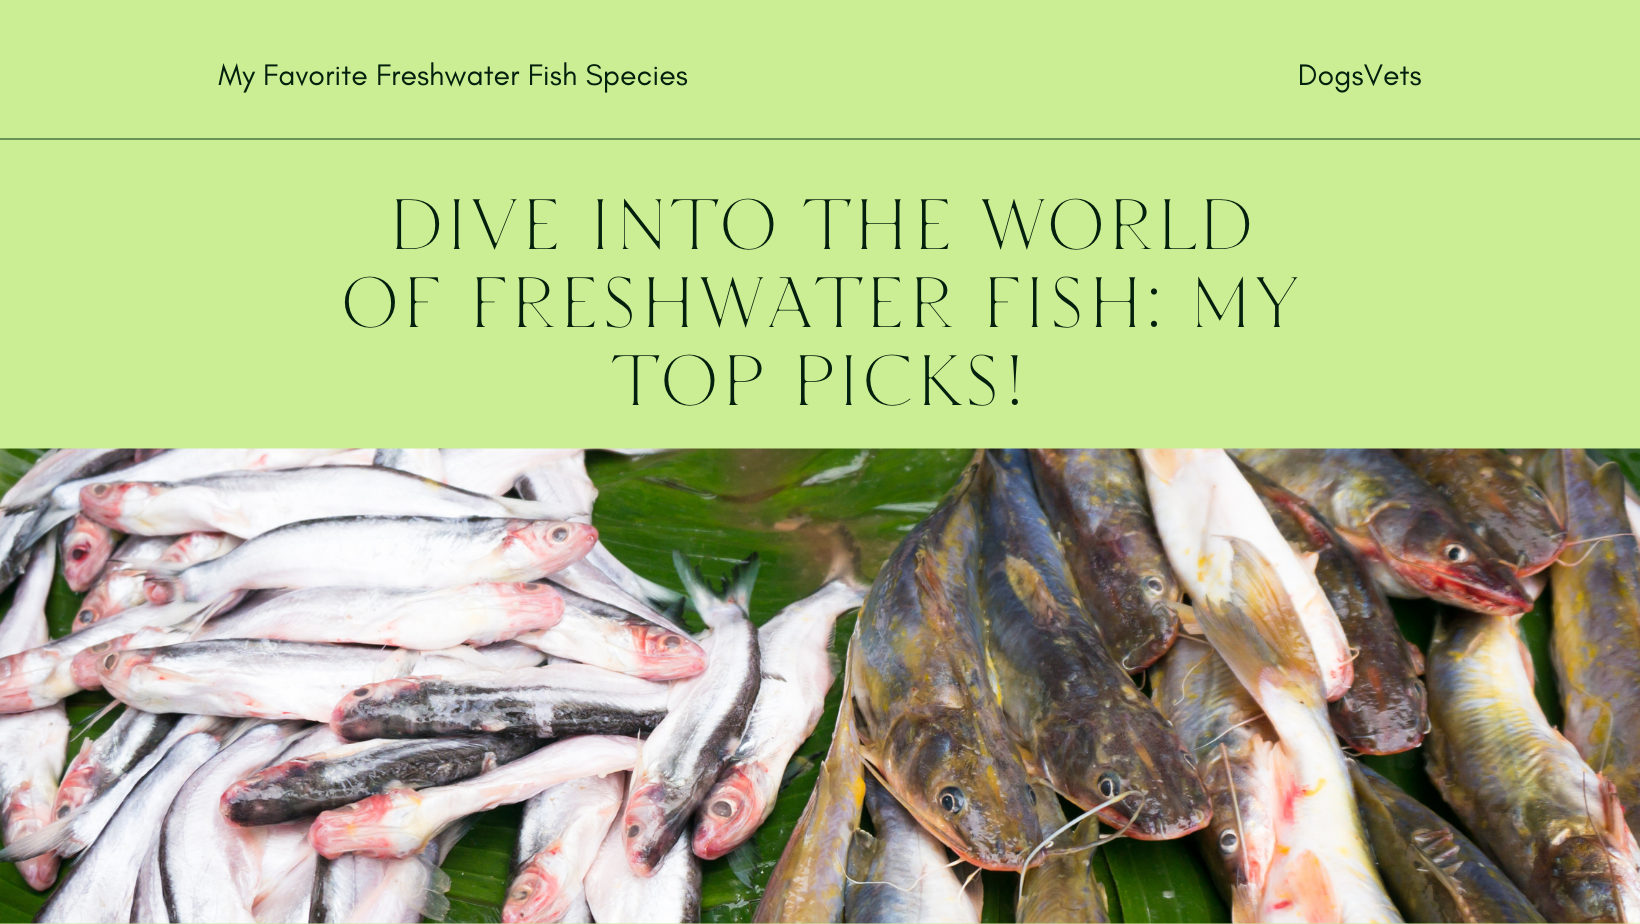 Dive into the World of Freshwater Fish: My Top Picks!